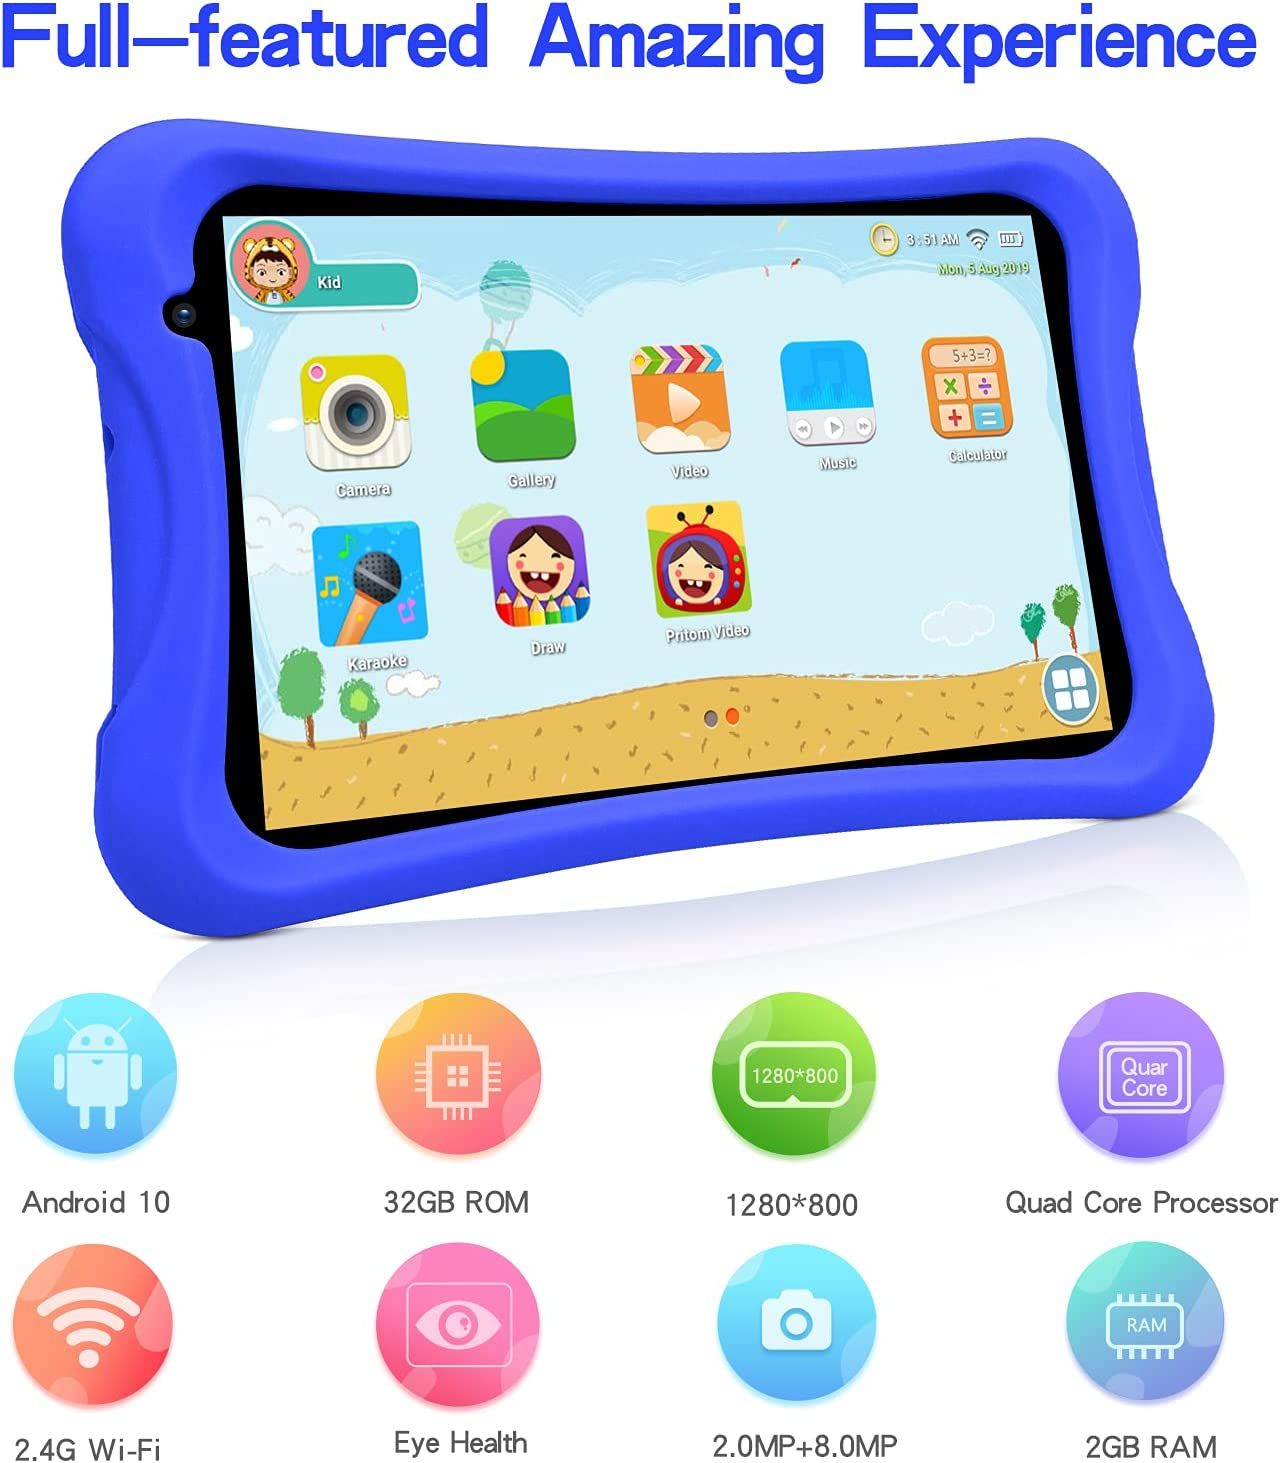 The 6 Best Family-Friendly Tablets for Entertainment